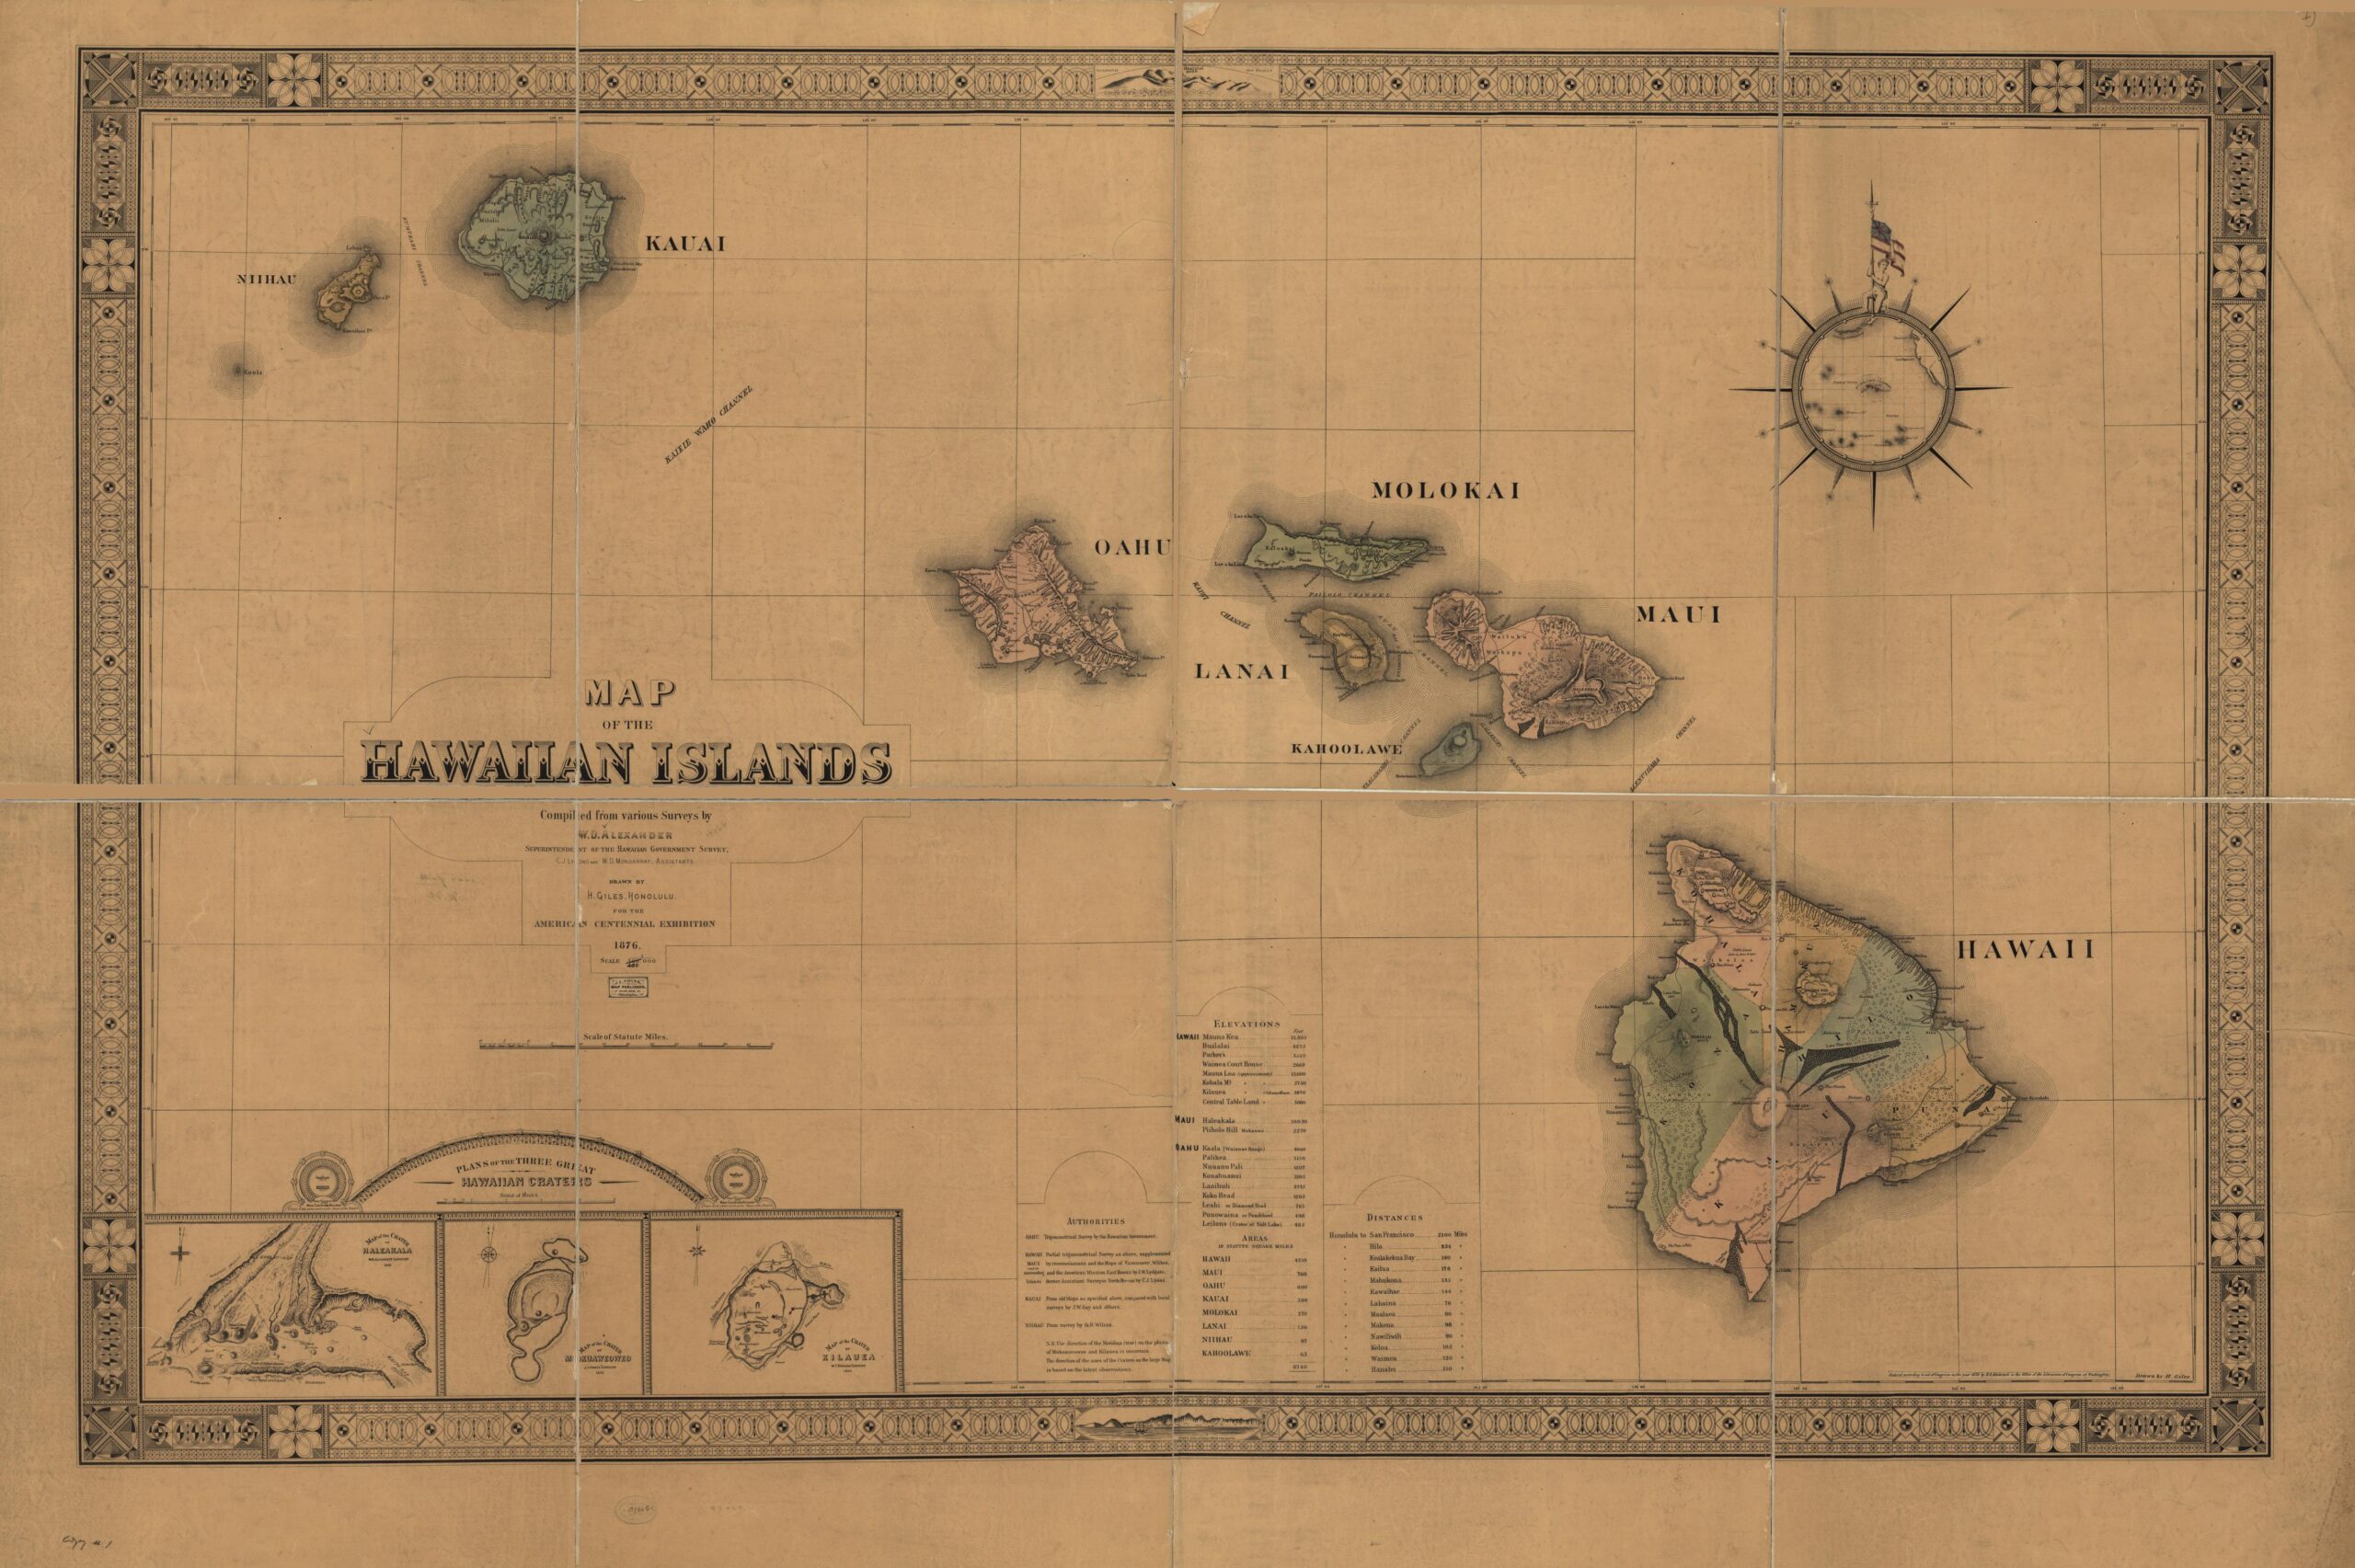 Colored map of the Hawaiian island from 1876 showing moku districts.